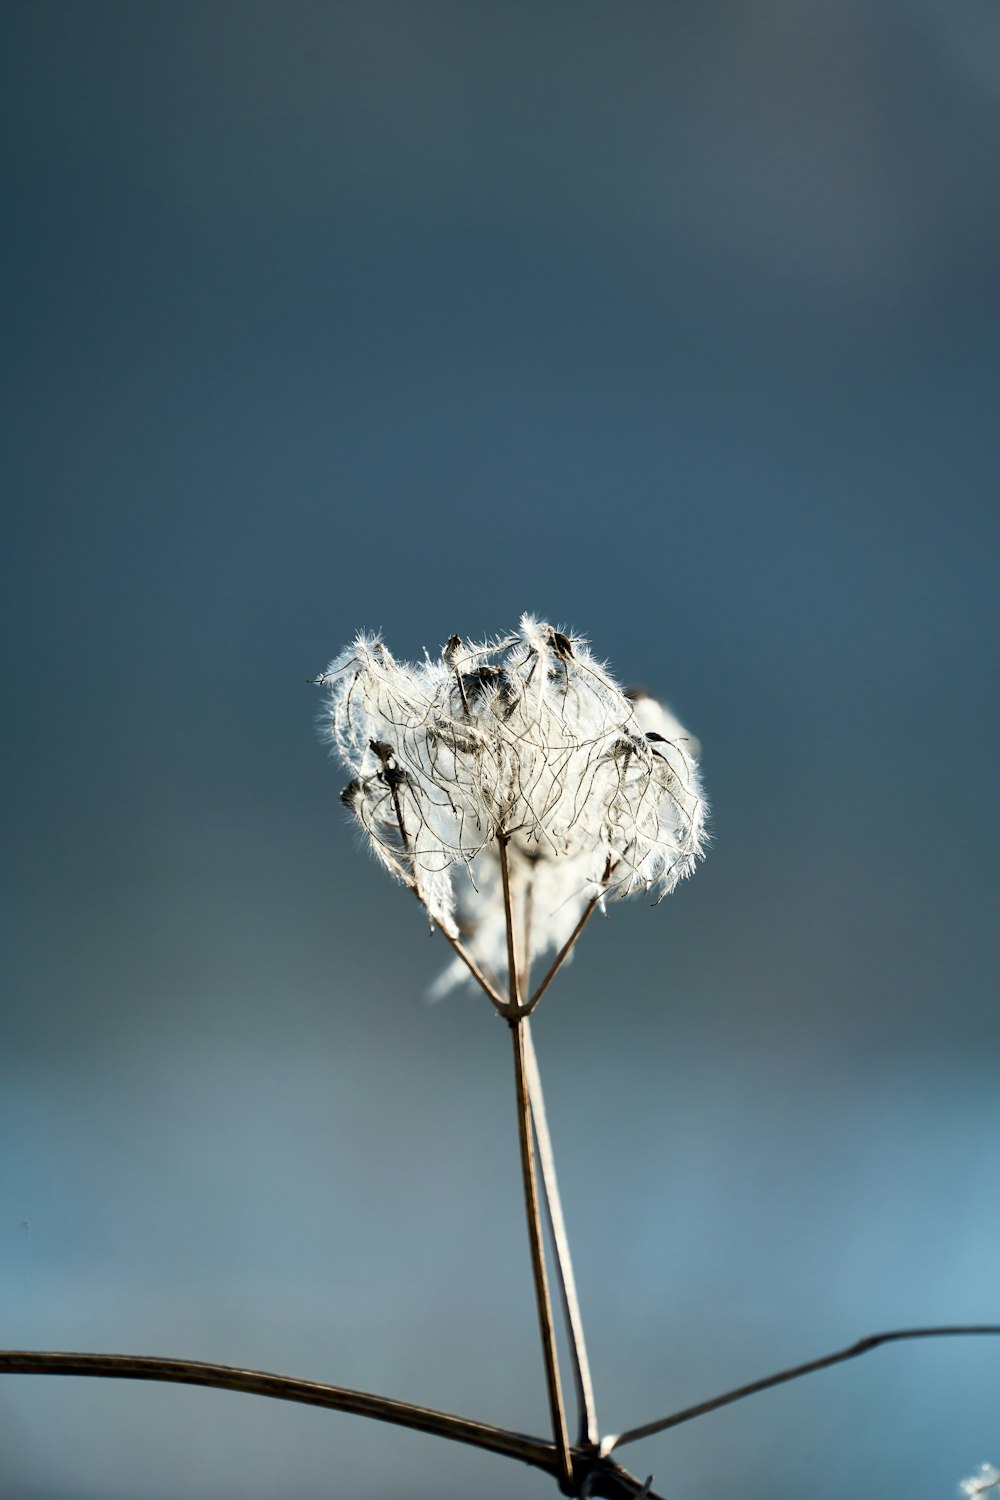 a close up of a dandelion with a blue sky in the background